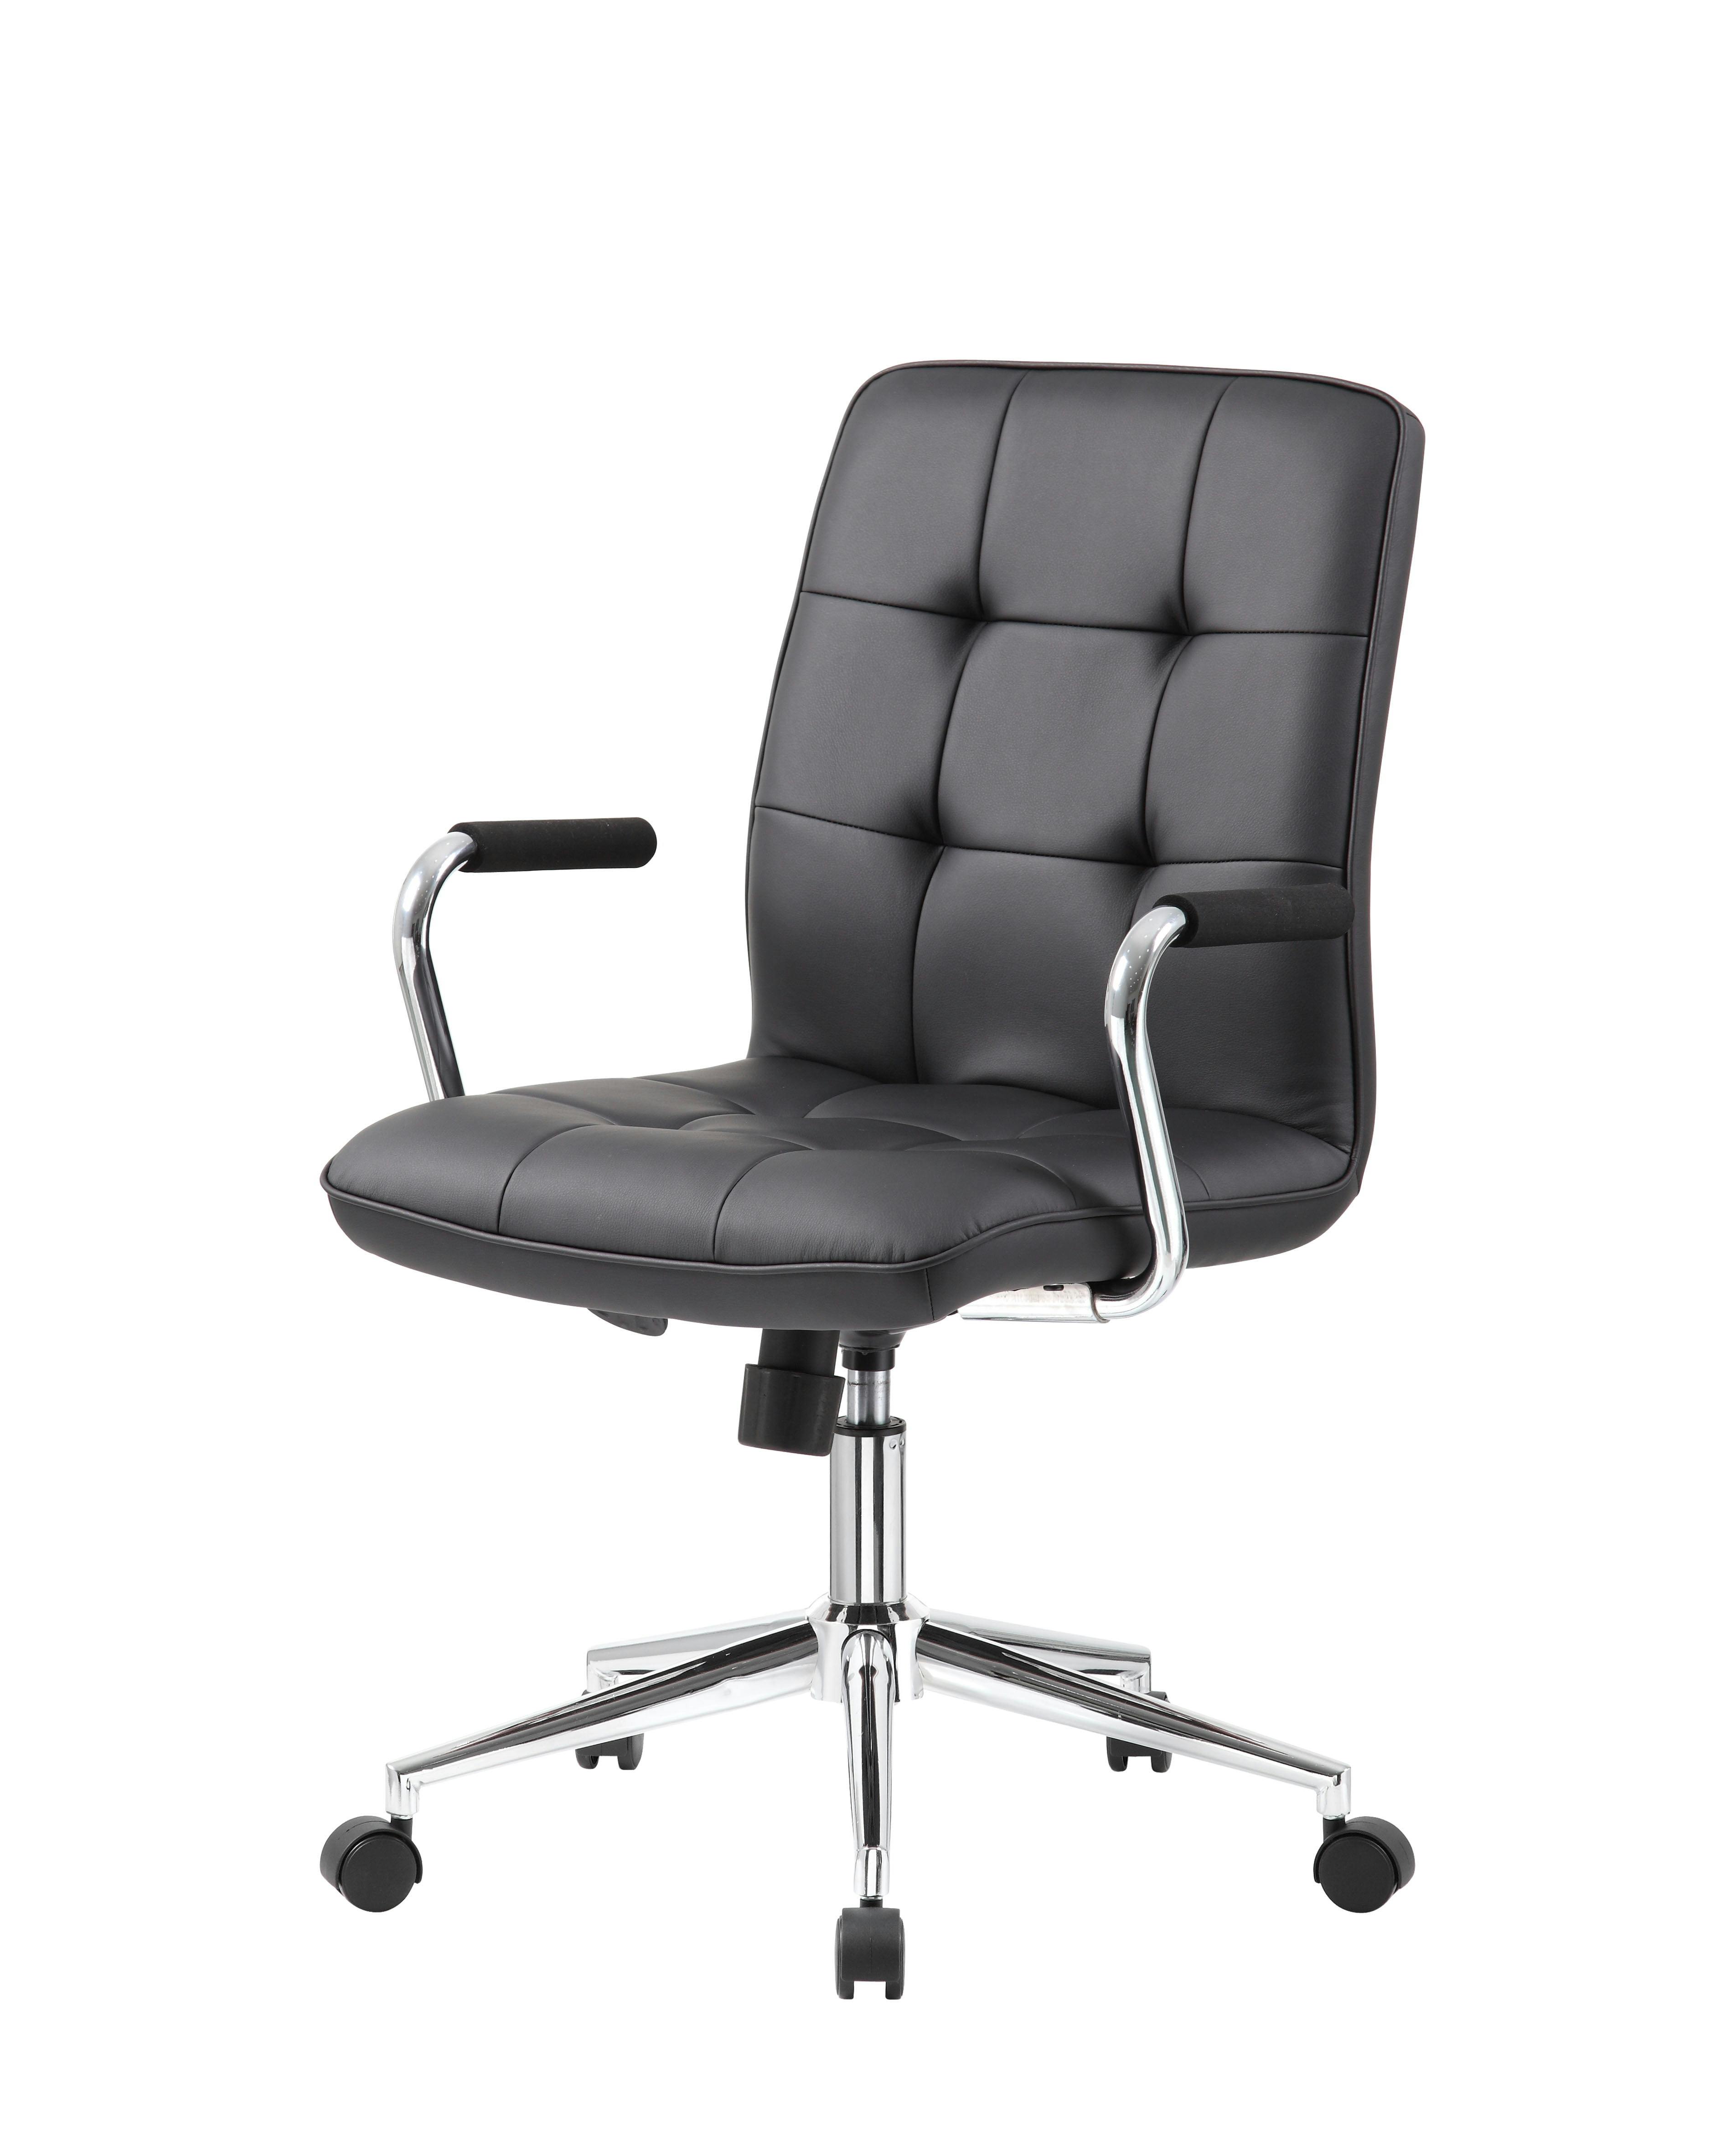 ErgoFlex Black Leather & Metal Swivel Task Chair with Chrome Accents